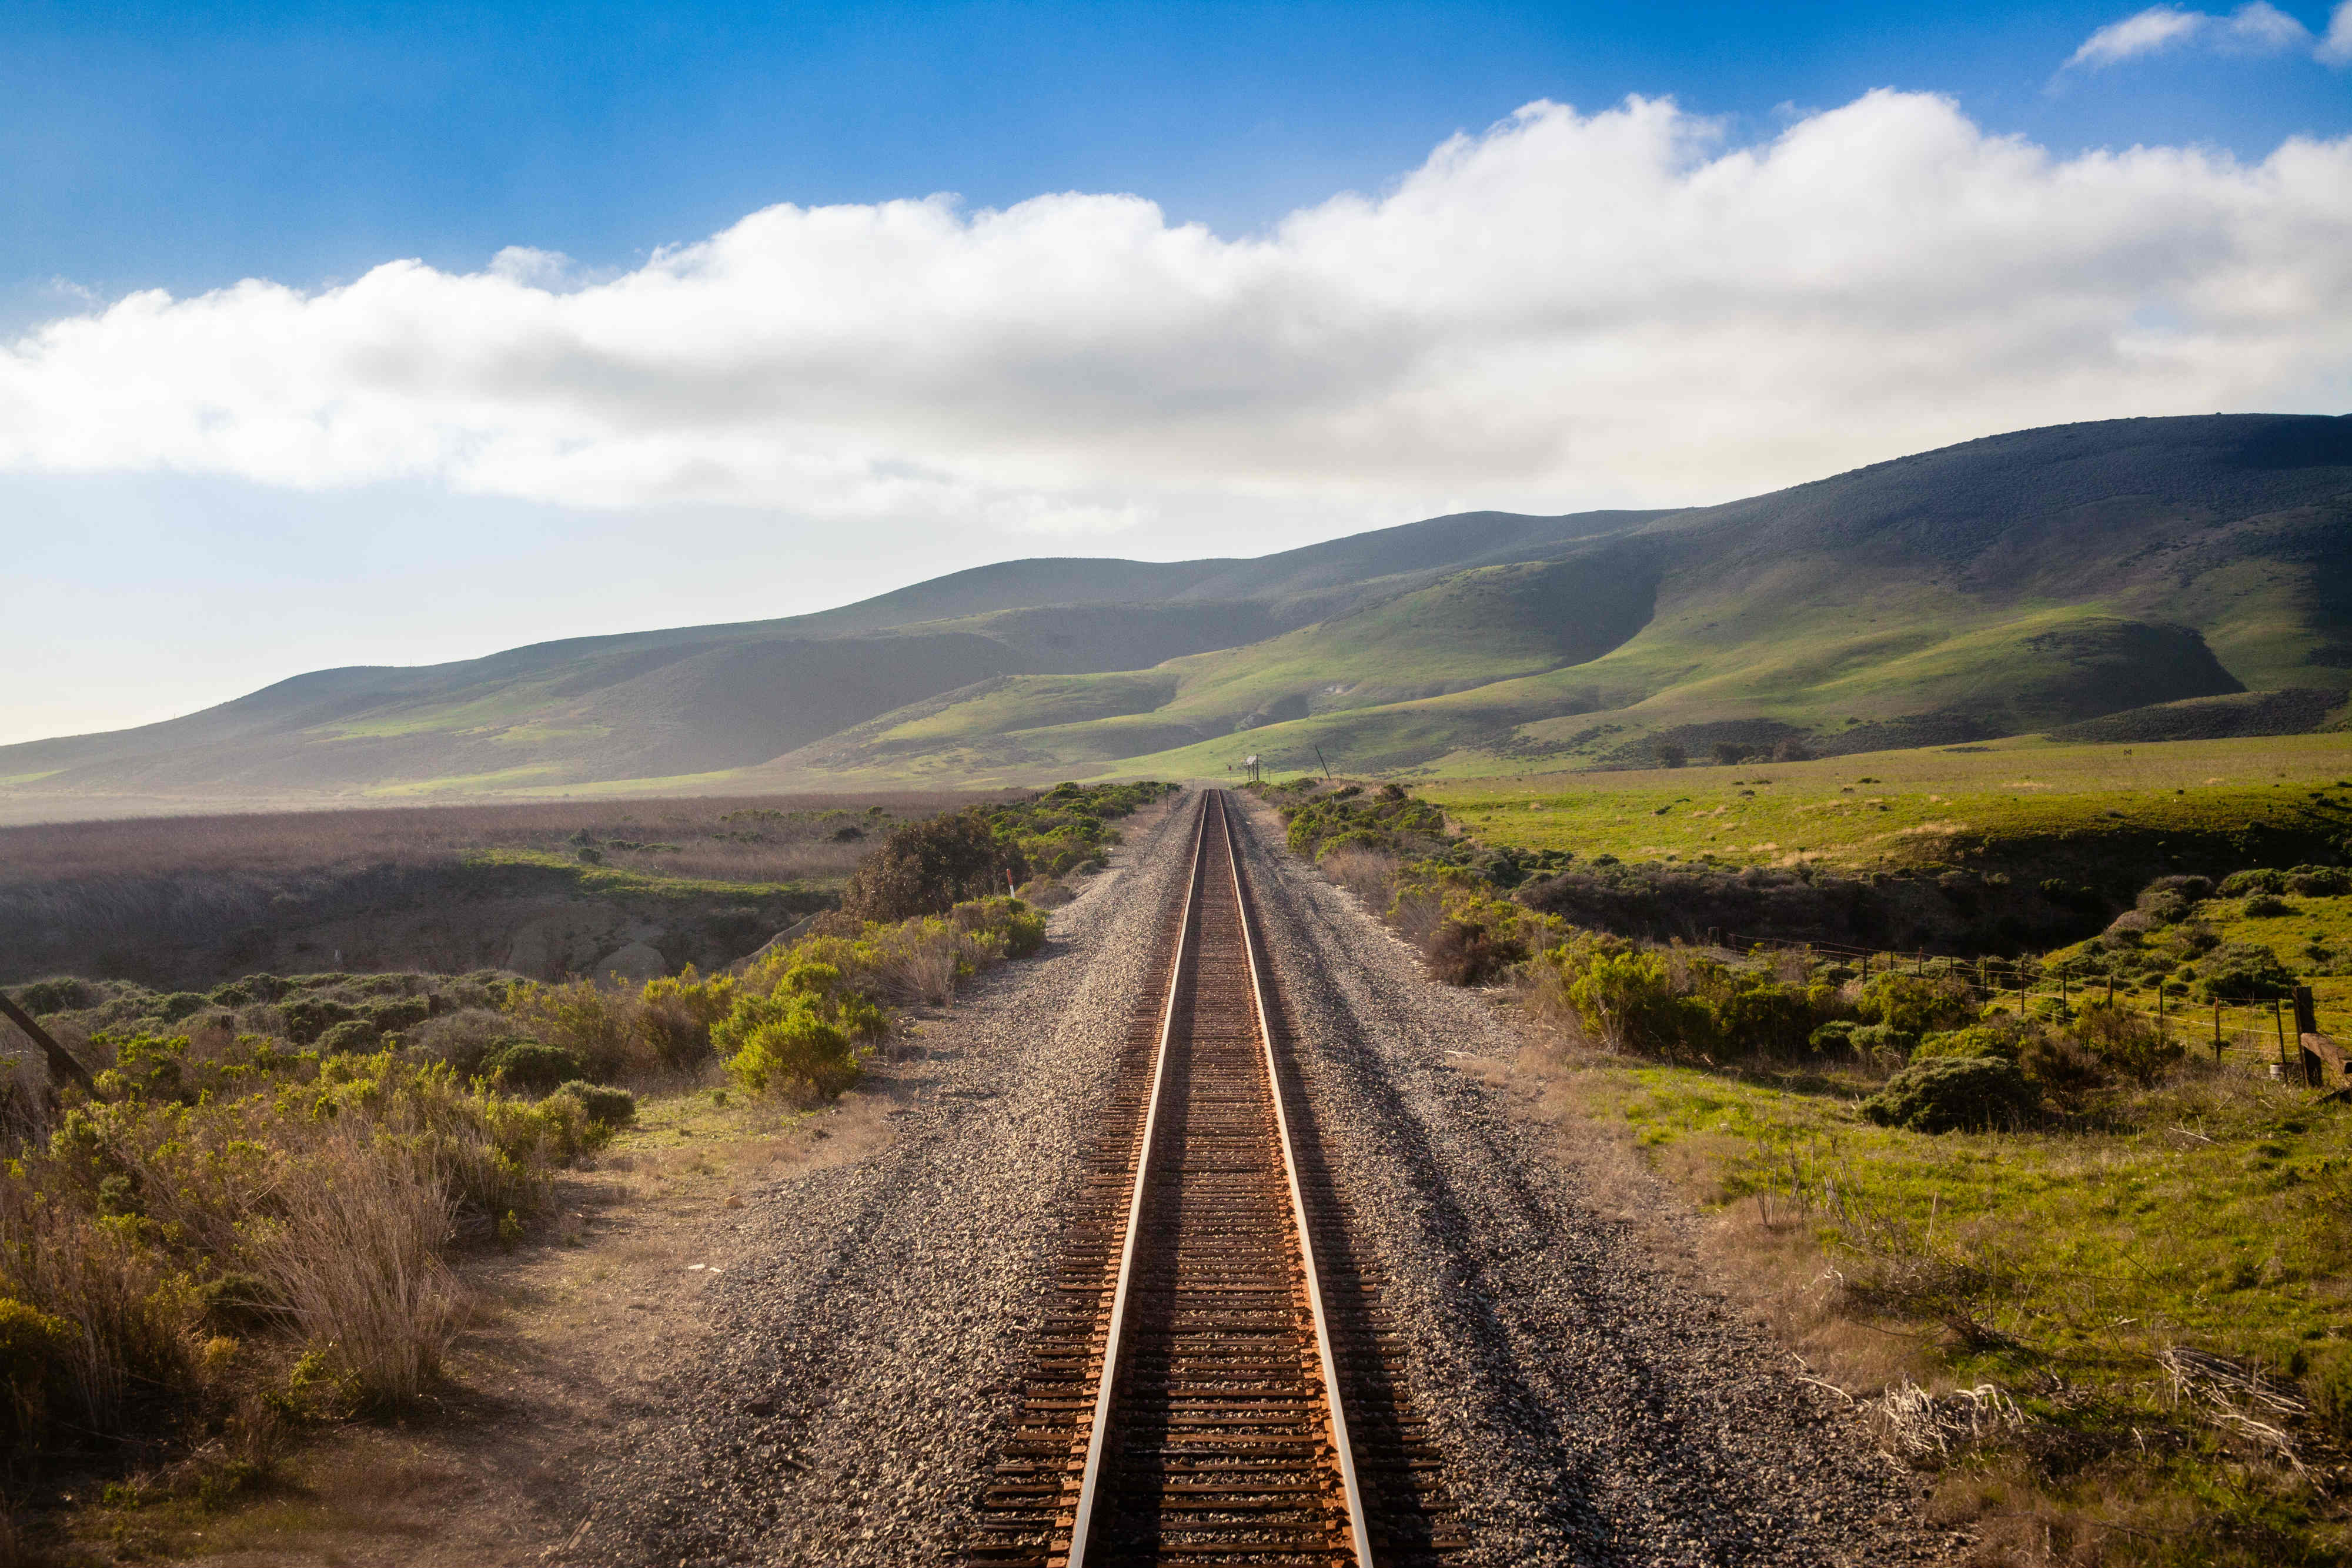 Meditation on a Caltrain: Understanding where to travel to next